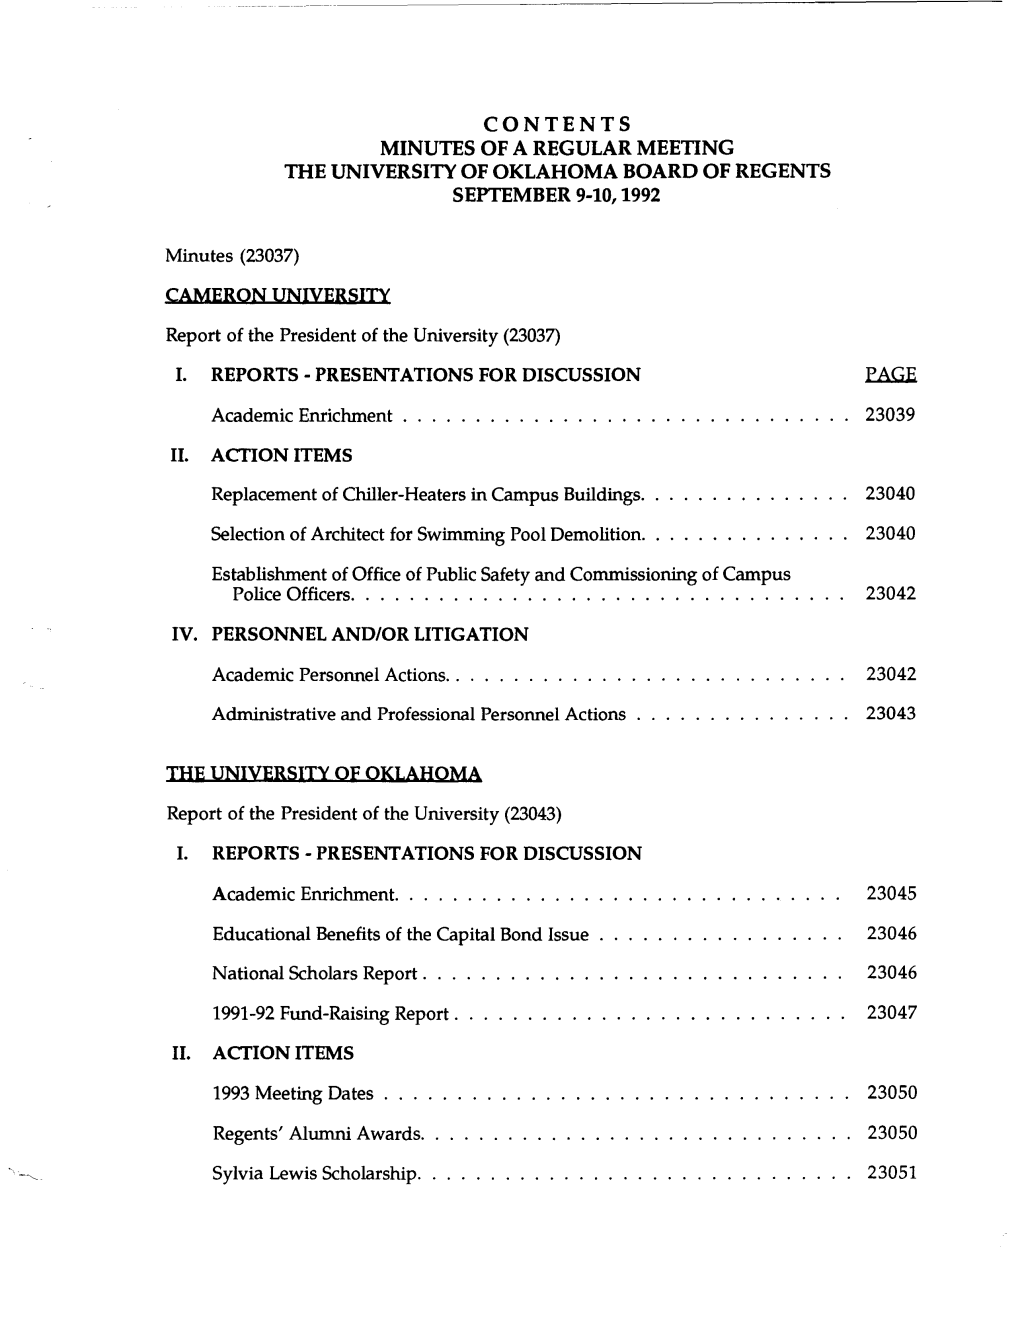 Contents Minutes of a Regular Meeting the University of Oklahoma Board of Regents September 9-10, 1992